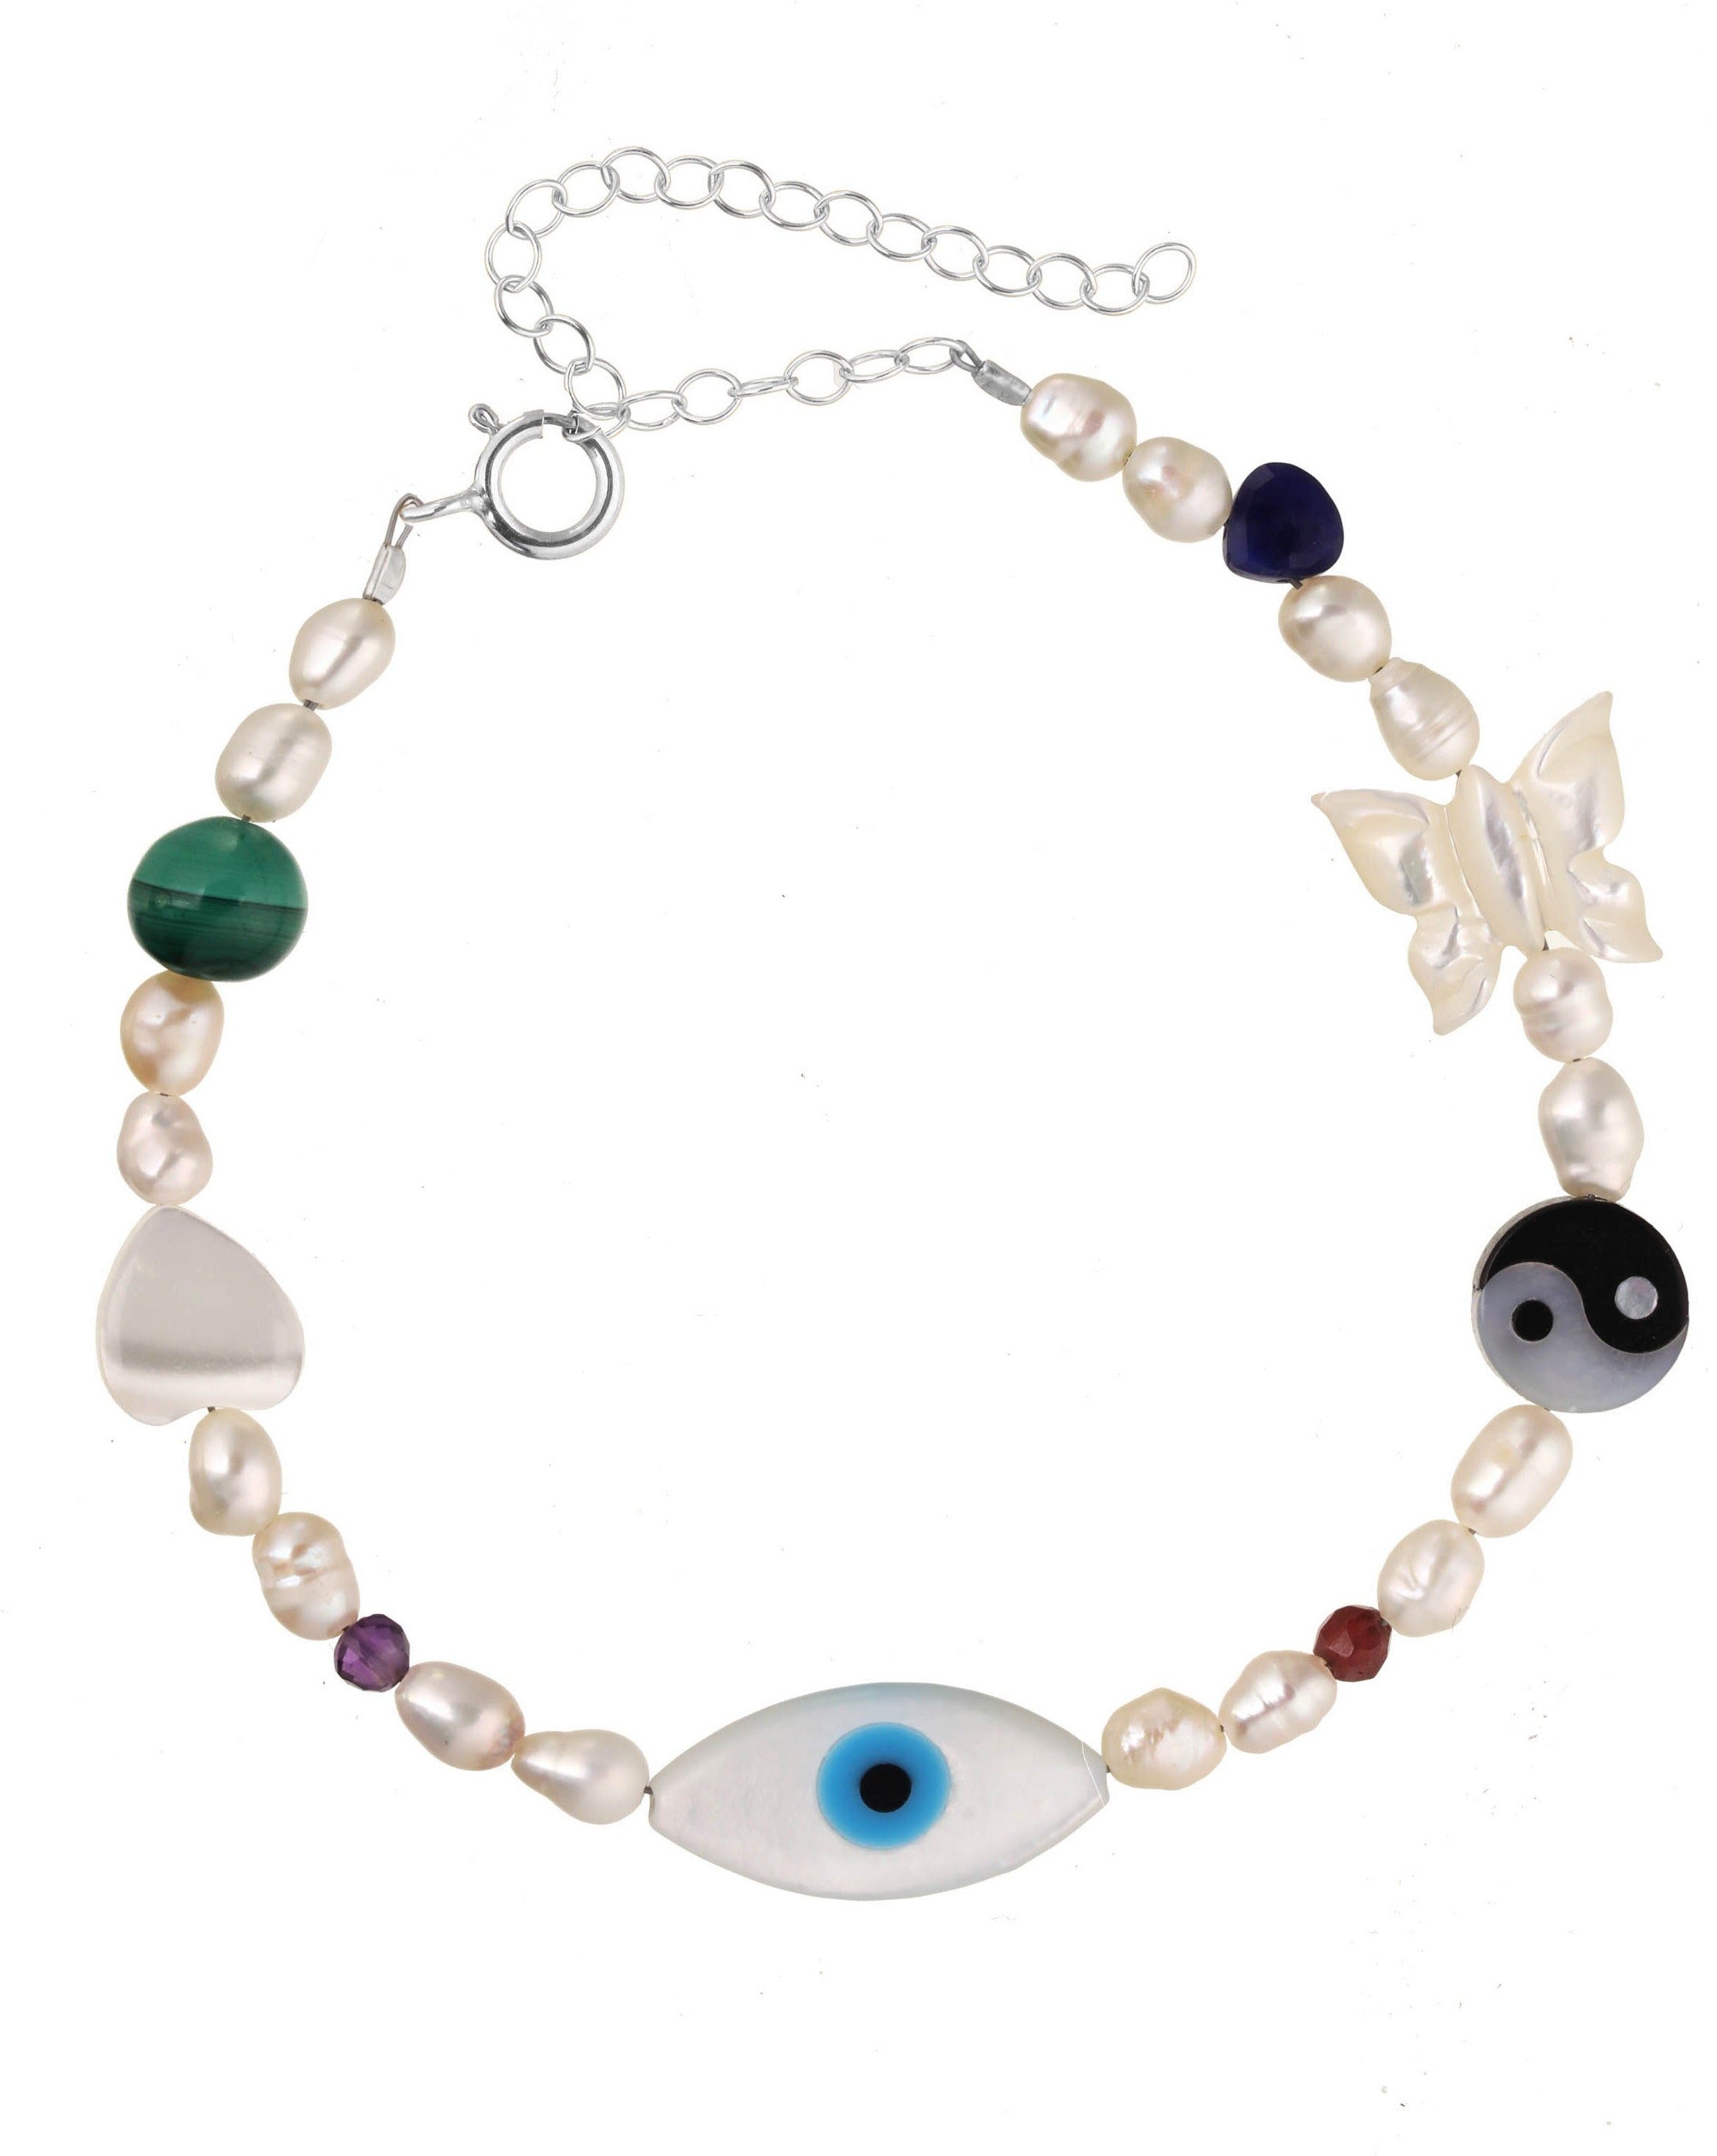 Lexie Bracelet by KOZAKH. A 6 to 7 inch adjustable length bracelet in Sterling Silver, featuring Pink Tourmaline slice, Mother of Pearl butterfly charm, round cut Malachite gemstone, Mother of Pearl eye charm, and 2.5mm to 3mm Fresh water pearls.